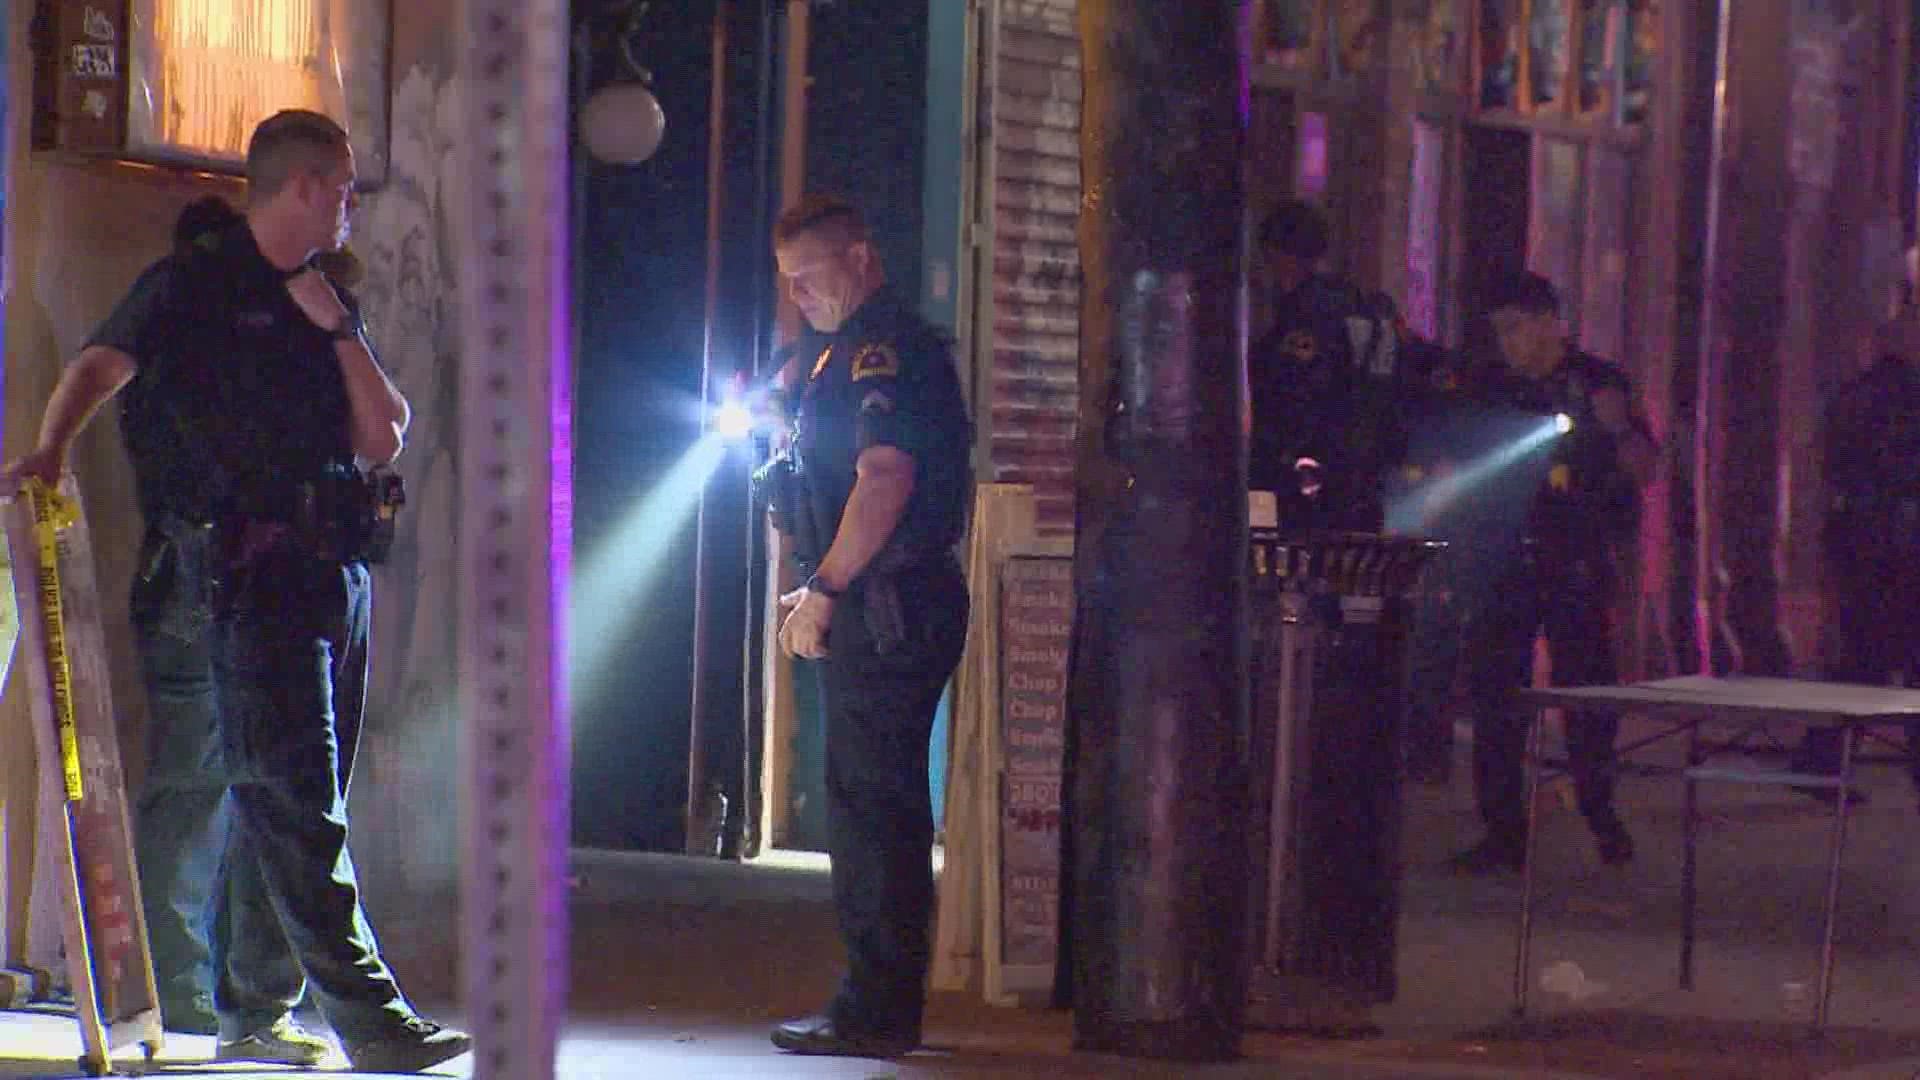 Two men were killed and three others injured in a shooting in Deep Ellum early Friday, May 13 police said.